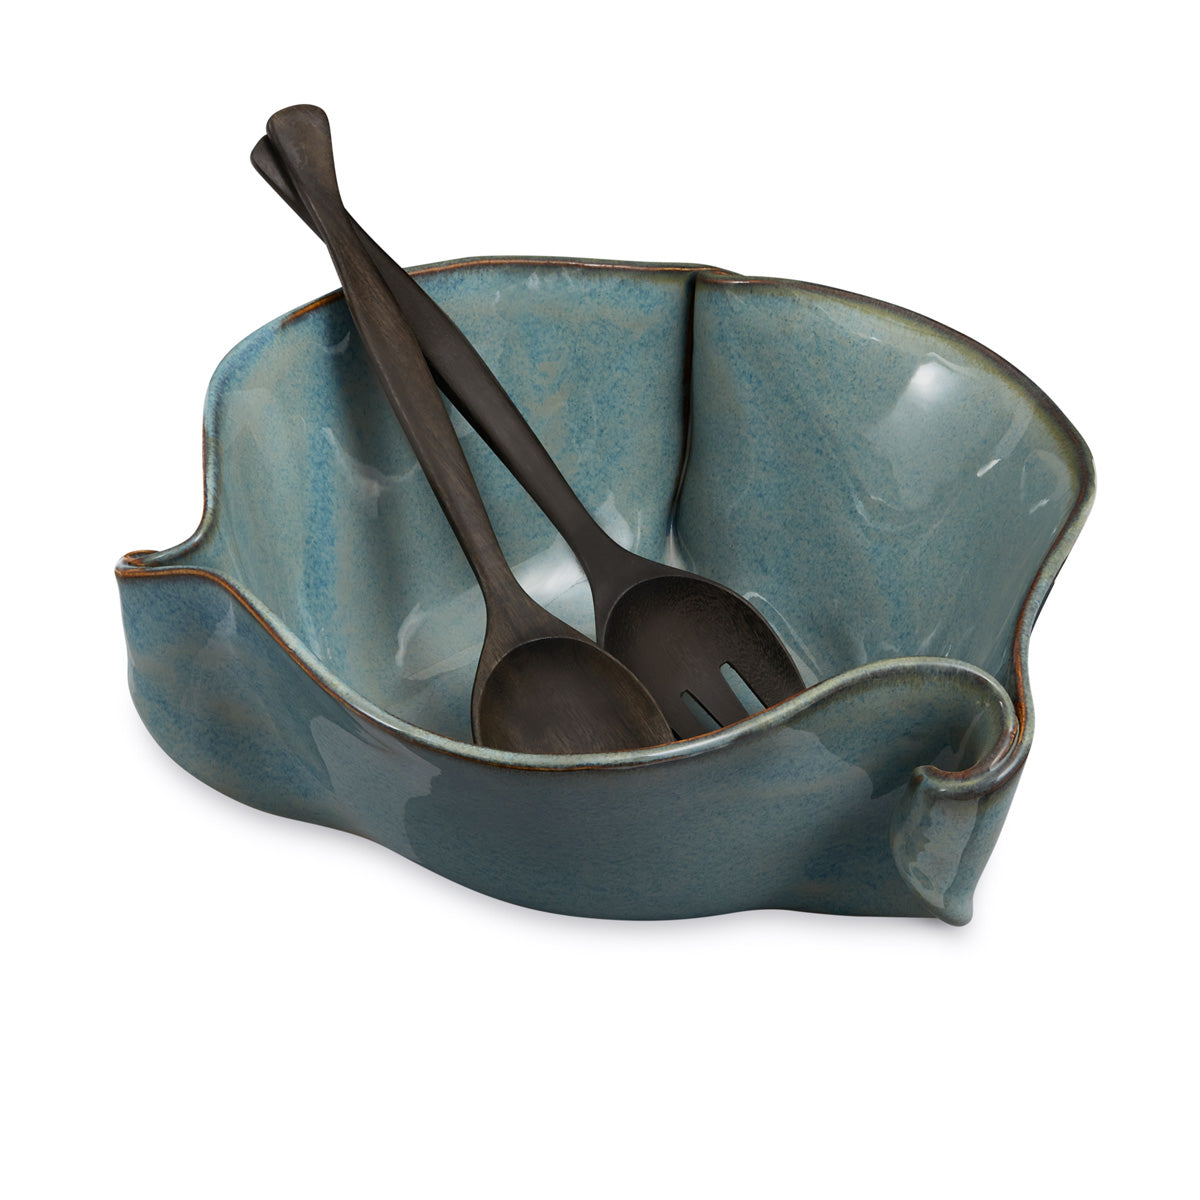 Hilborn Pottery Medley Serving Bowl for Funky Food